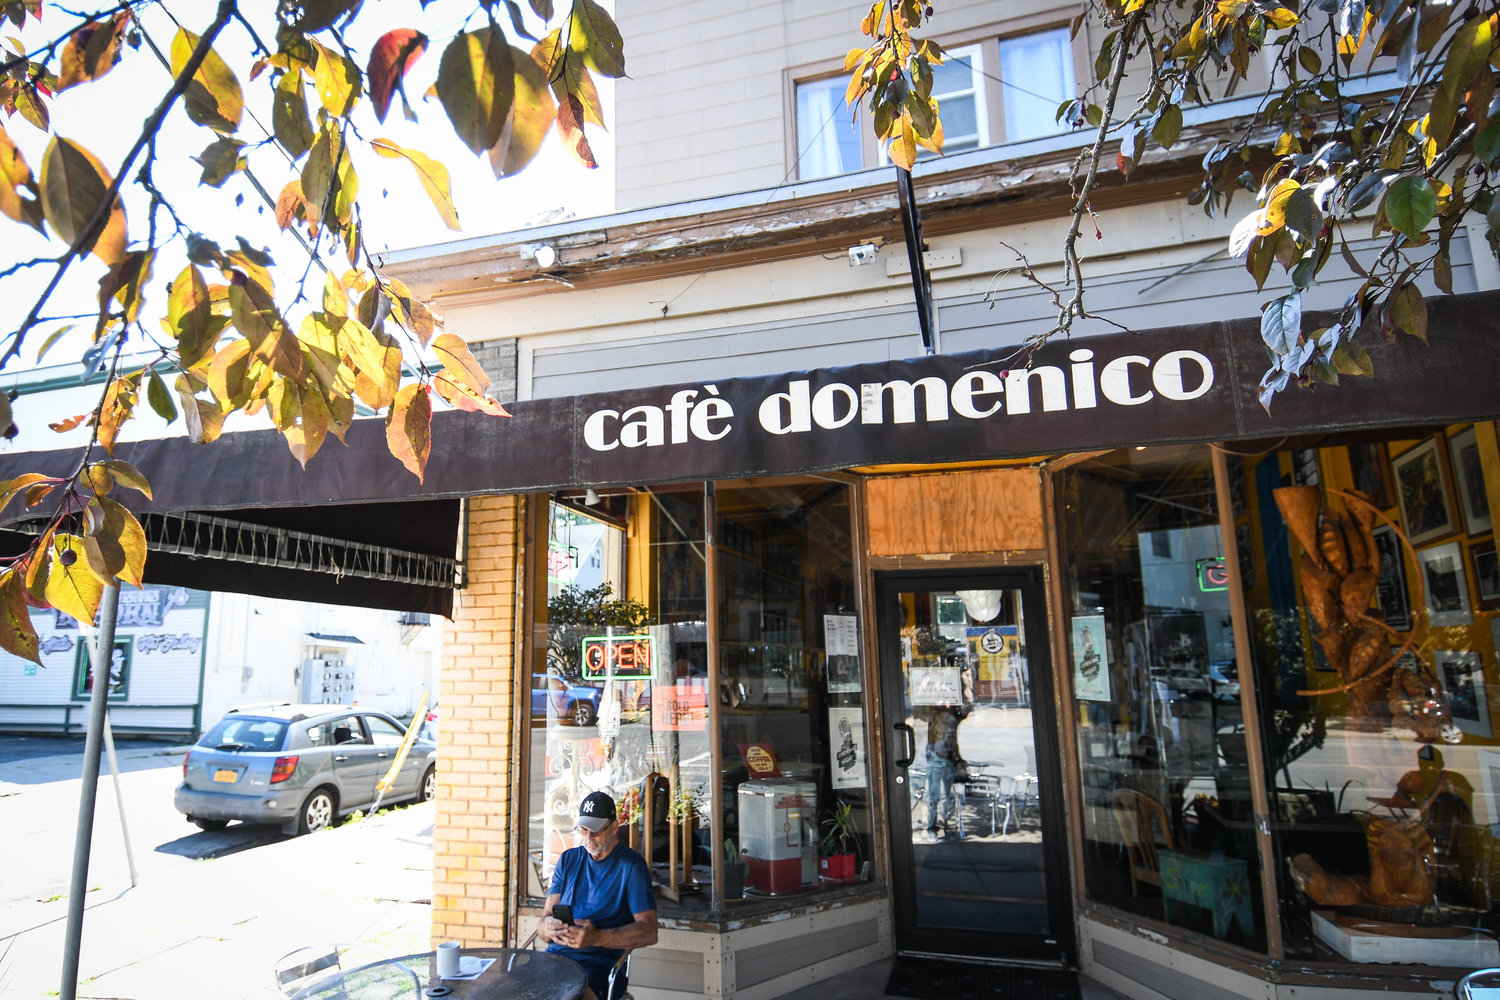 Cafe Domenico celebrates it’s 20th anniversary today. The party is free to the public and there will be a lineup of musical guests with art and refreshments available as well.